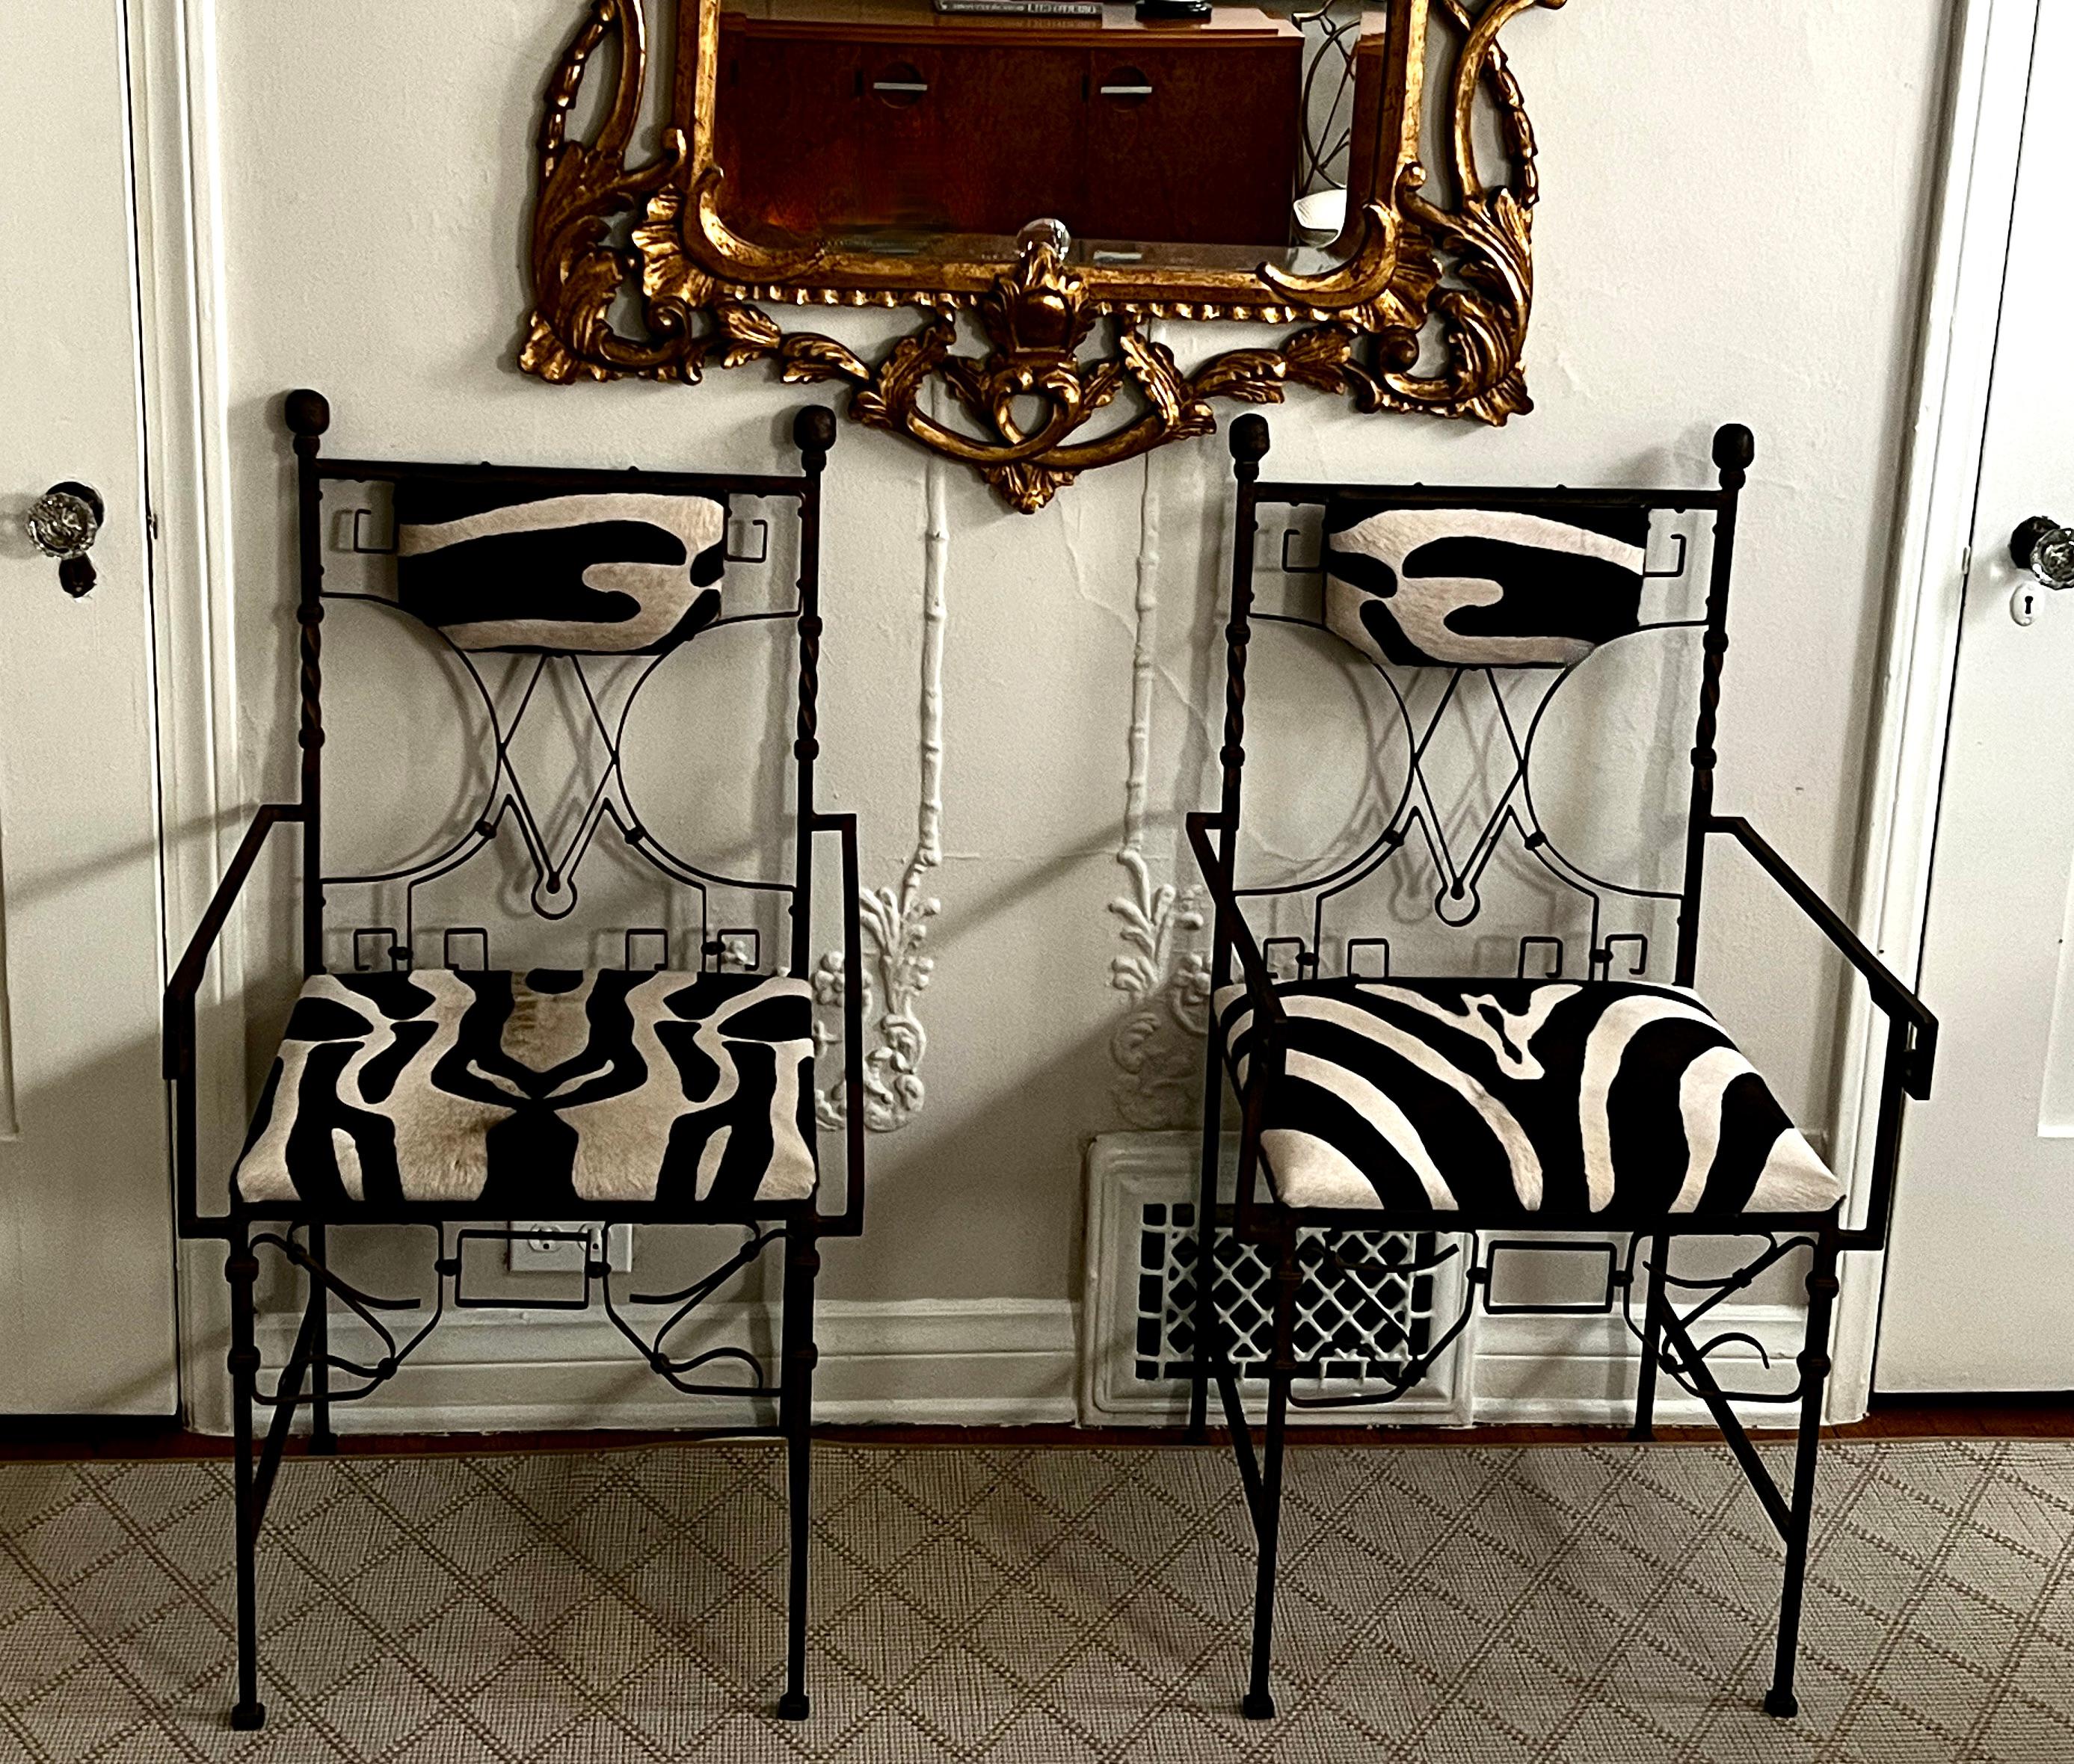 Welded Pair of Wrought Iron French Art Deco Chairs with Zebra Print For Sale